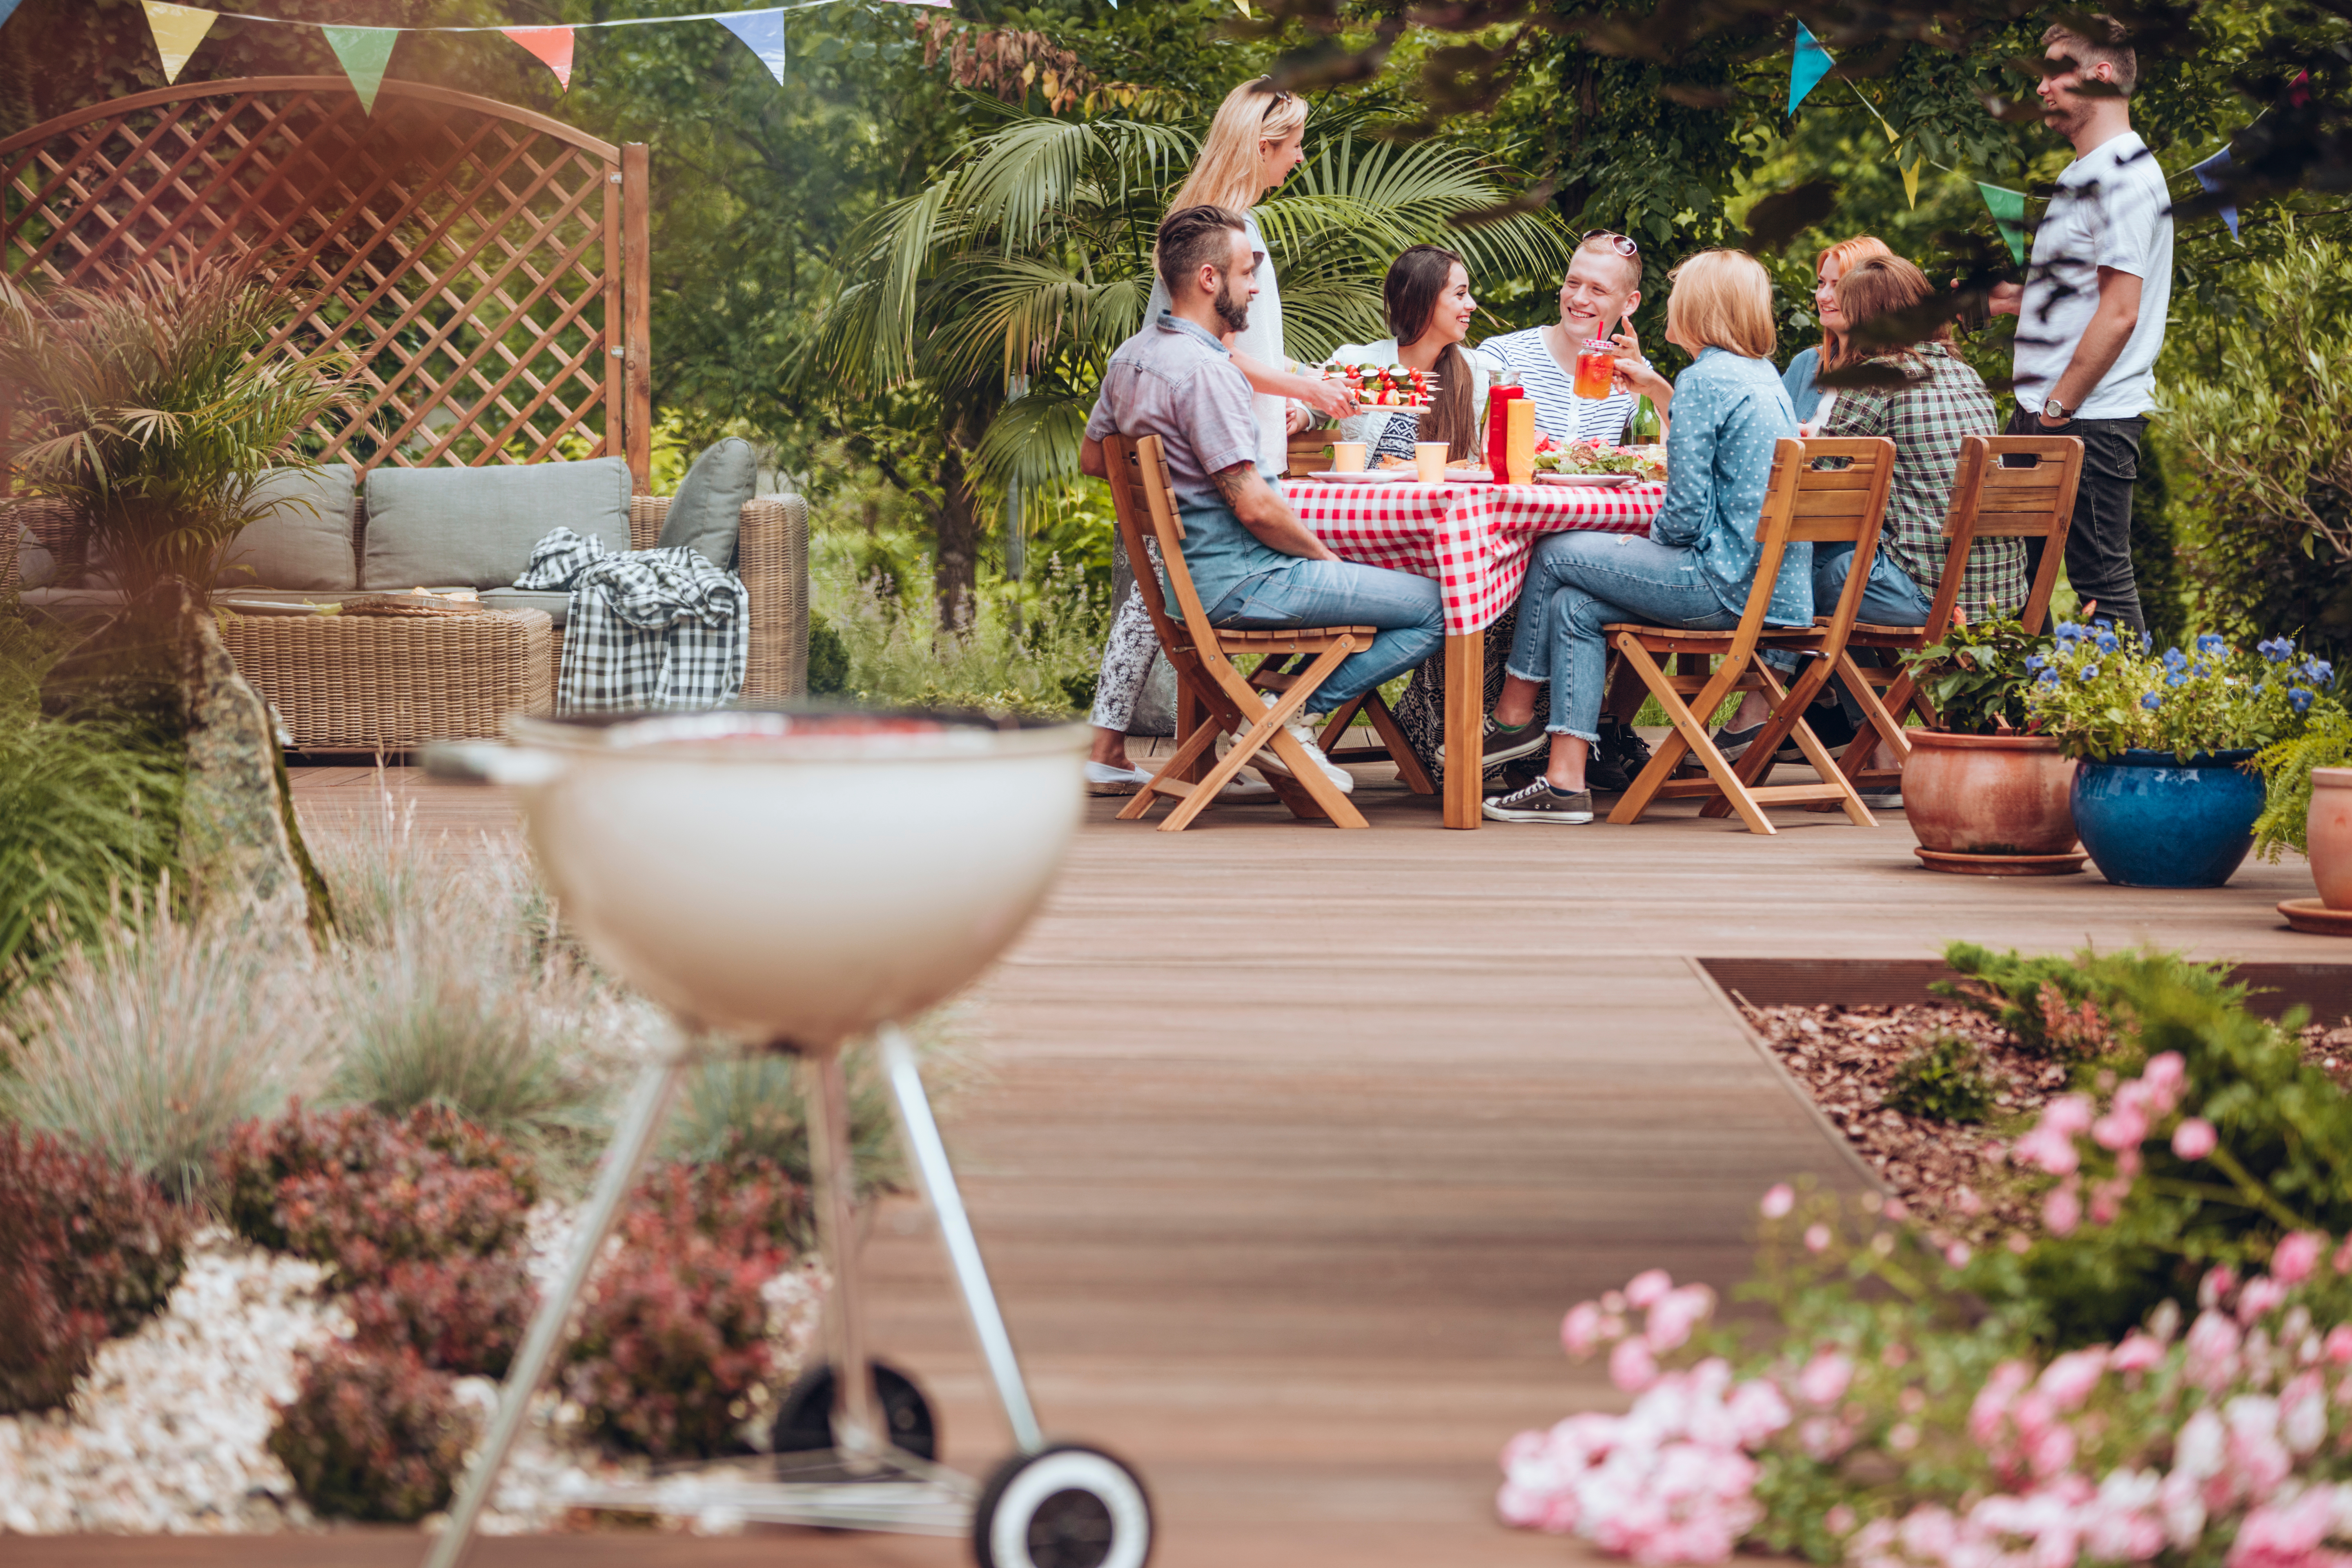 A group of friends at around a table on their garden decking having a barbecue